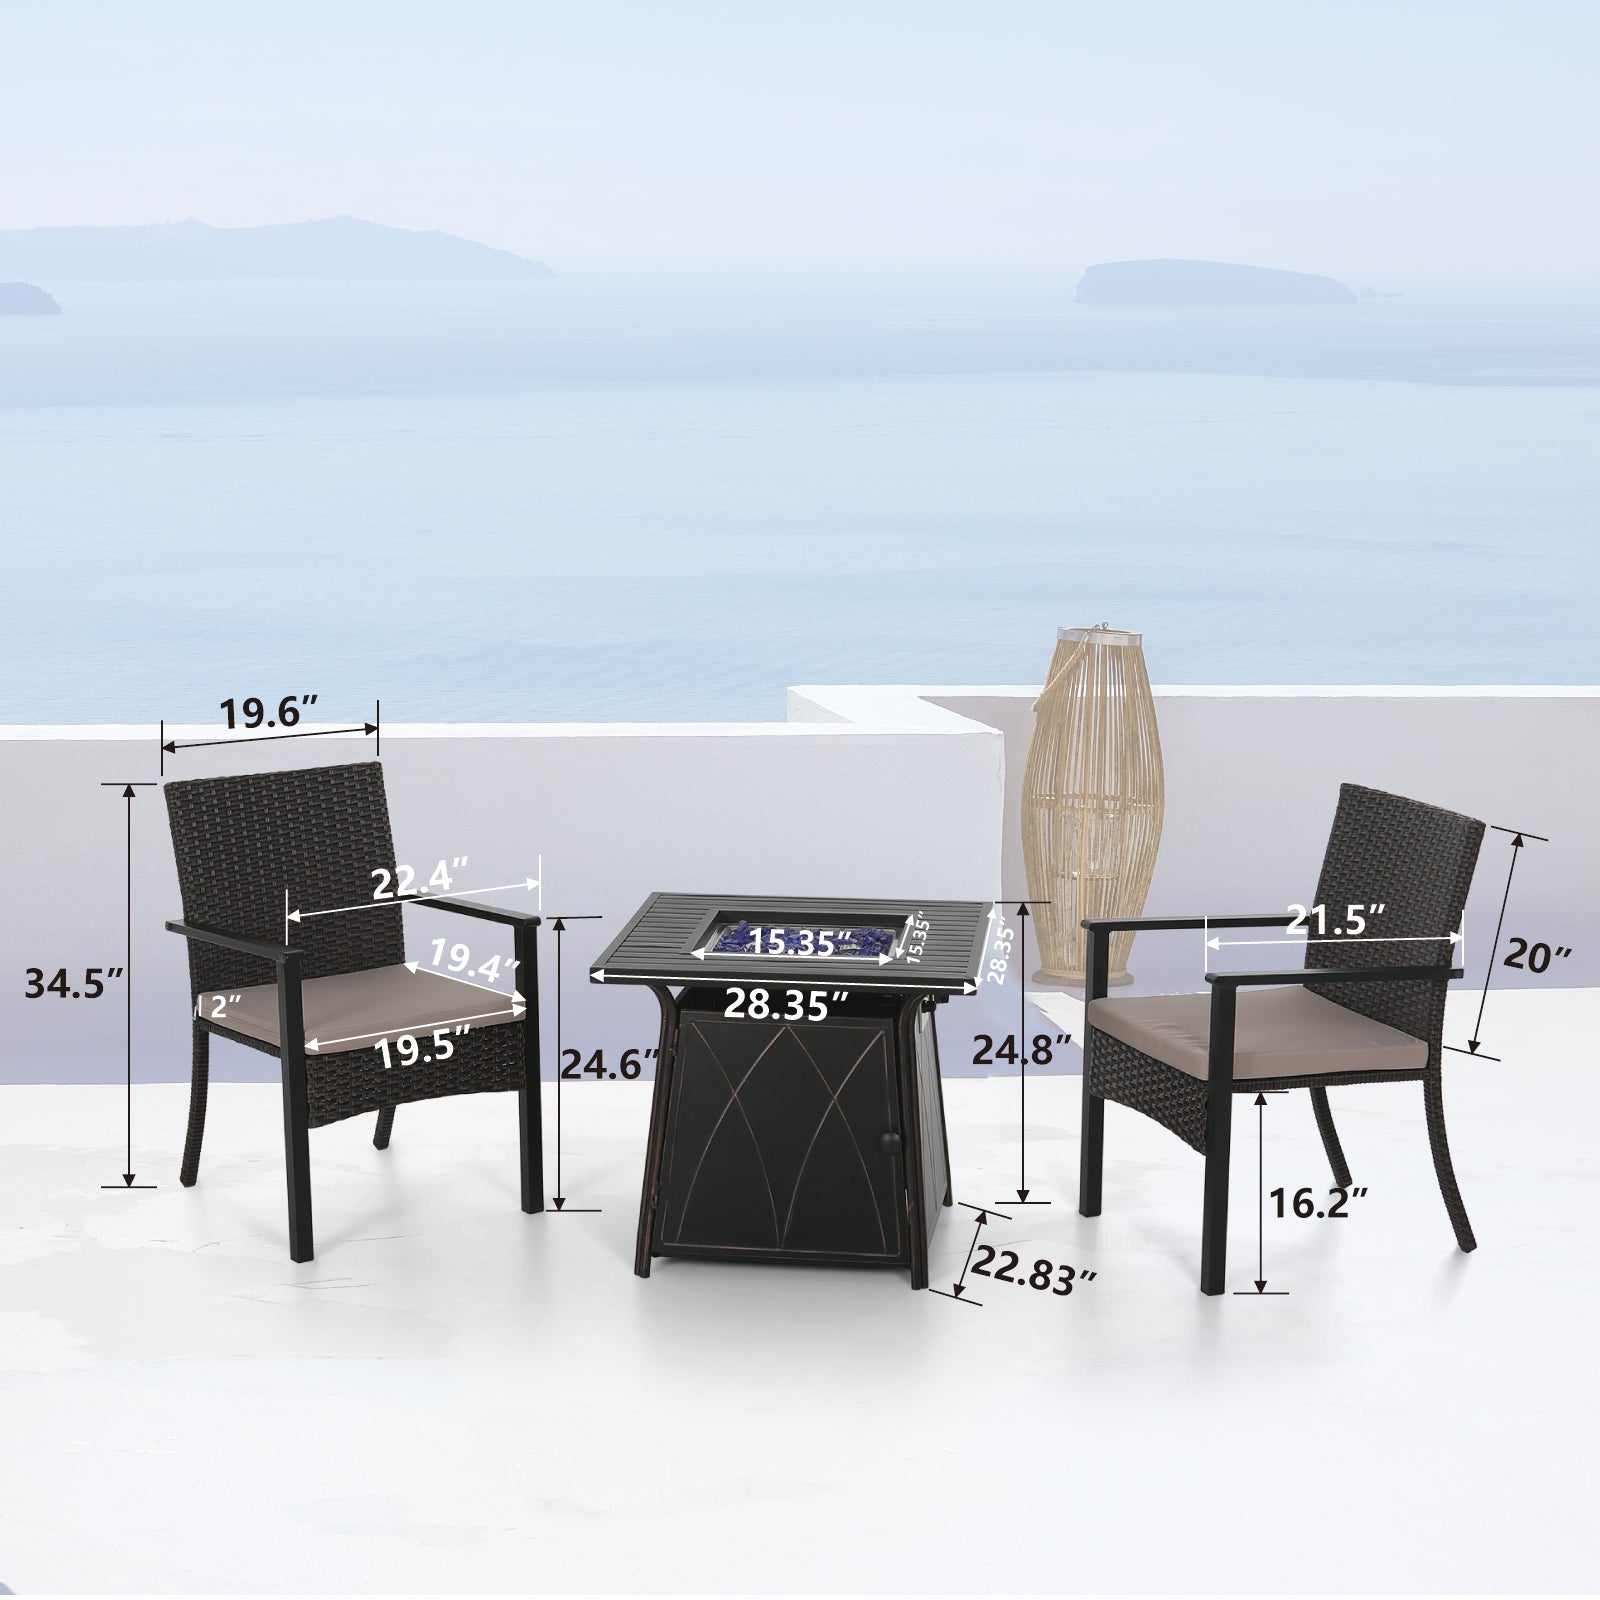 MFSTUDIO Patio Bistro Set 28" Square Steel Fire Pit Table & PE Rattan Cushioned Dining Chairs